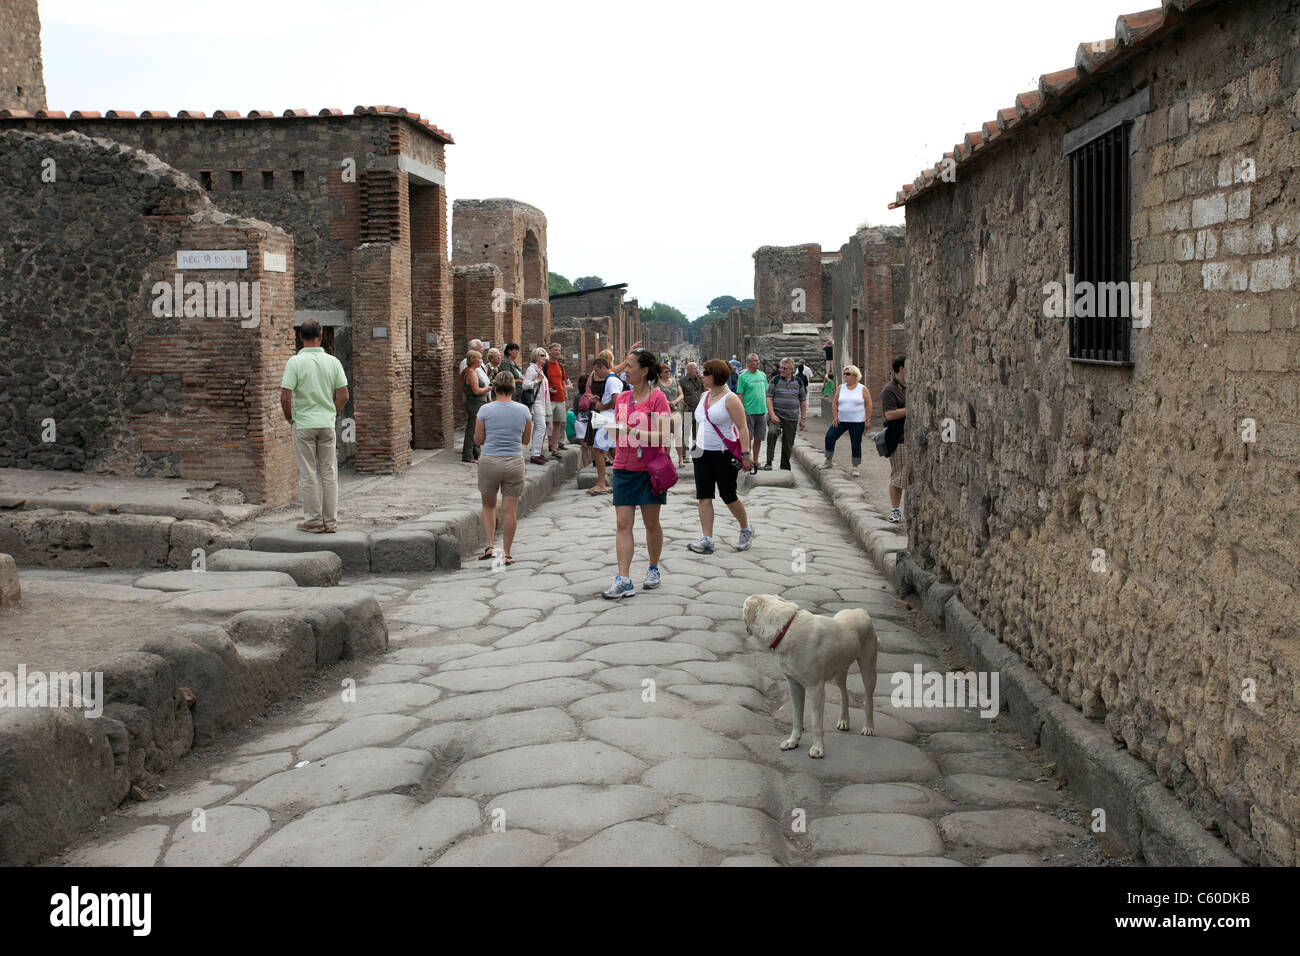 Pompeii Italy ruins of ancient city after the destruction by eruption of Mount Vesuvius volcano.  Tourists exploring with dog. Stock Photo